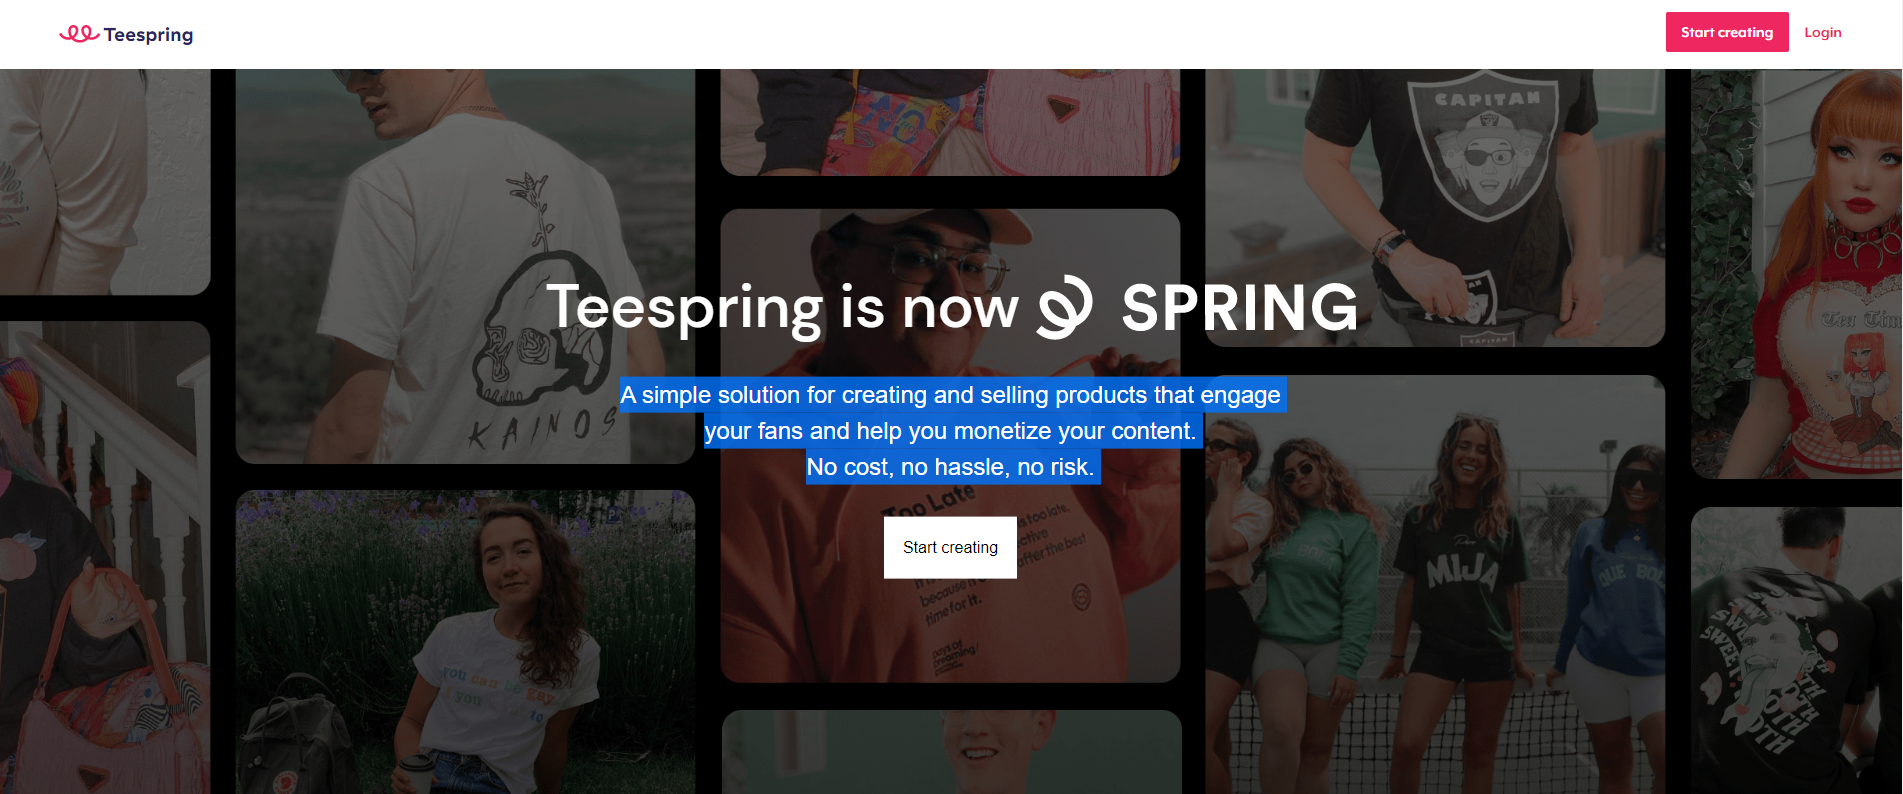 Teespring is now Spring